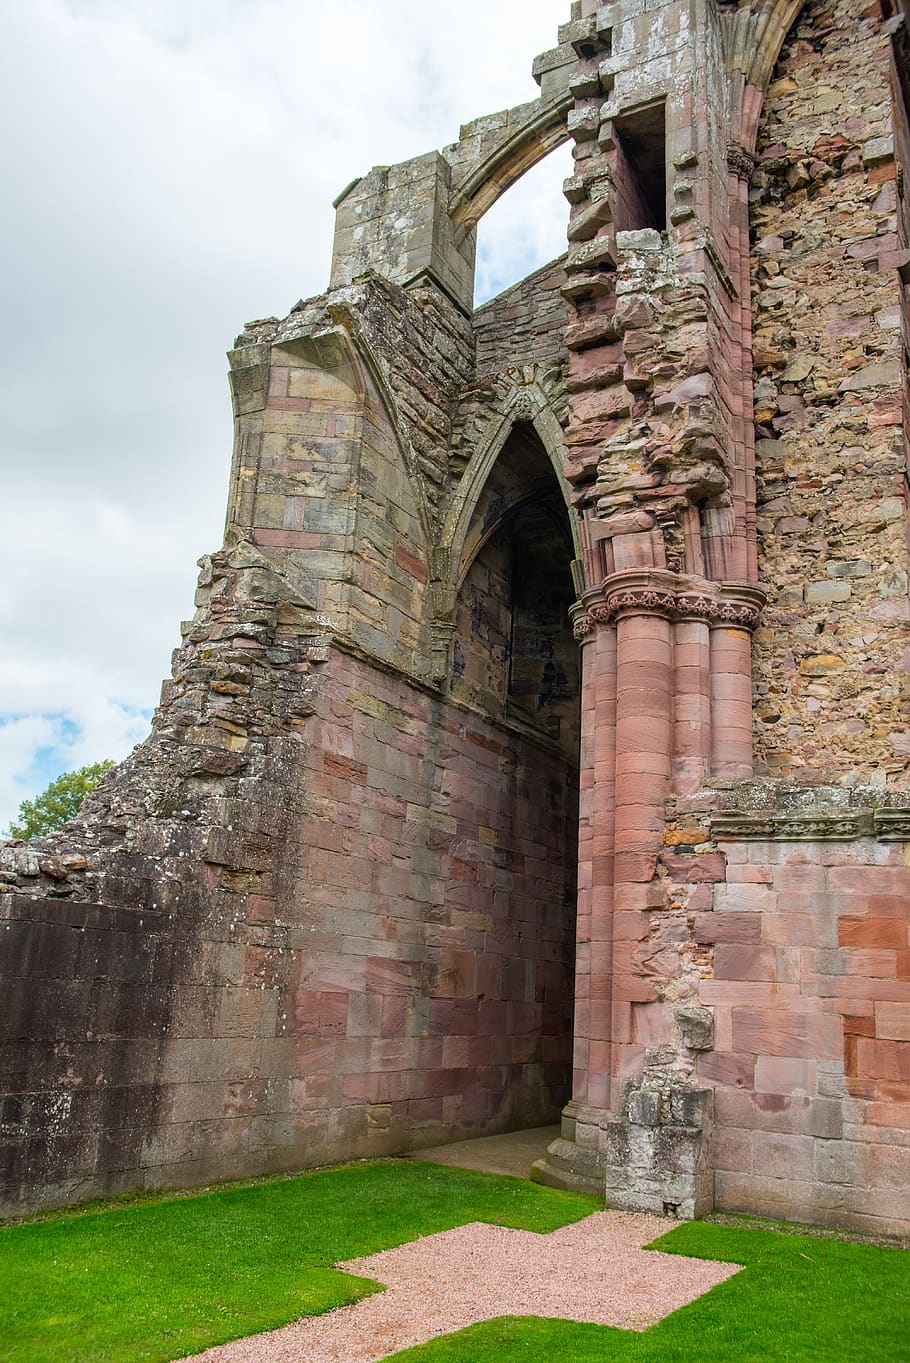 melrose abbey, abbey, scotland, church, stone, medieval, monastery, ruins, old, architecture